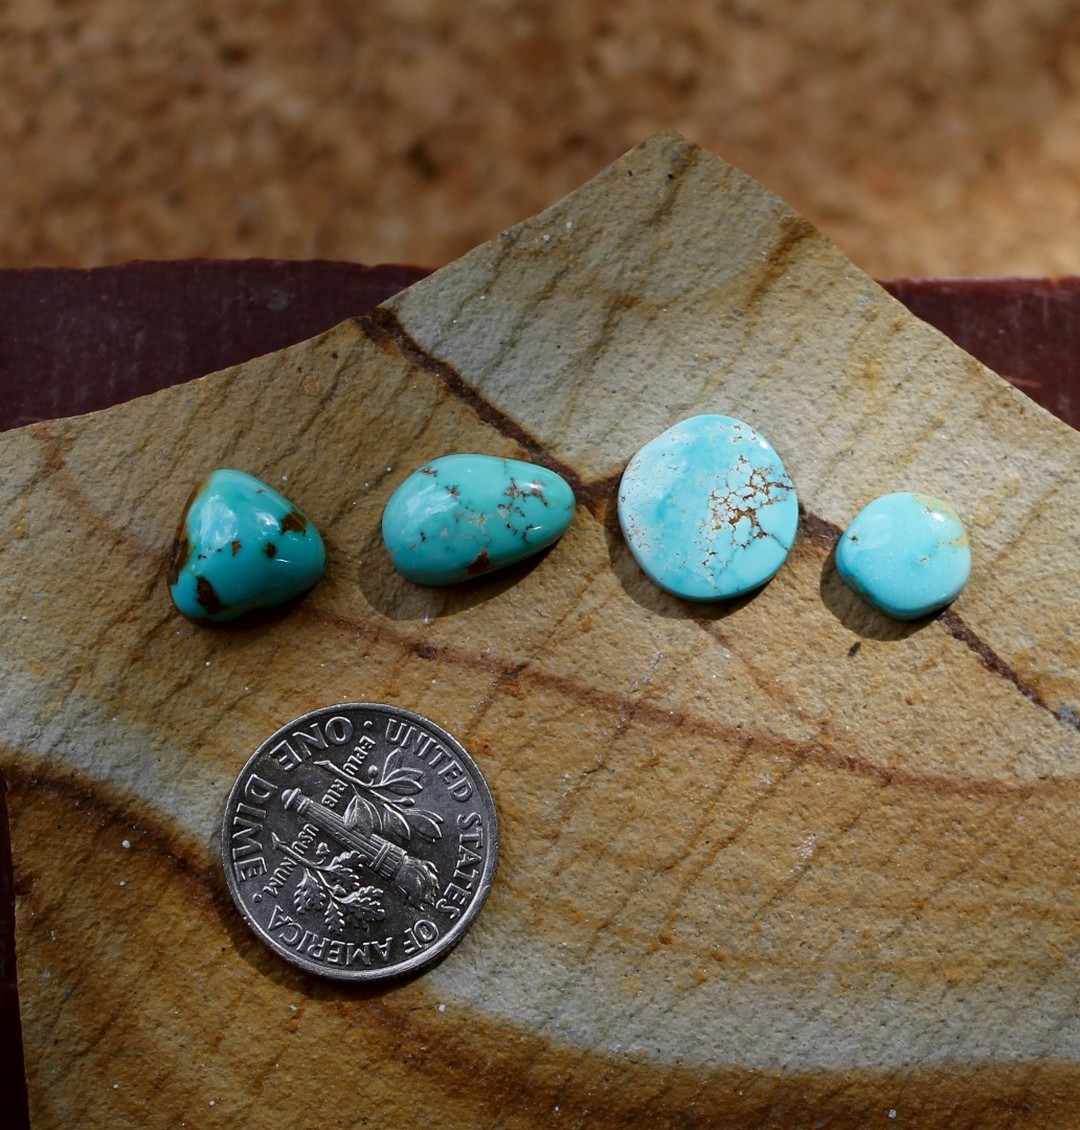 Blues contrasted by reds for these natural Stone Mountain Turquoise cabochons